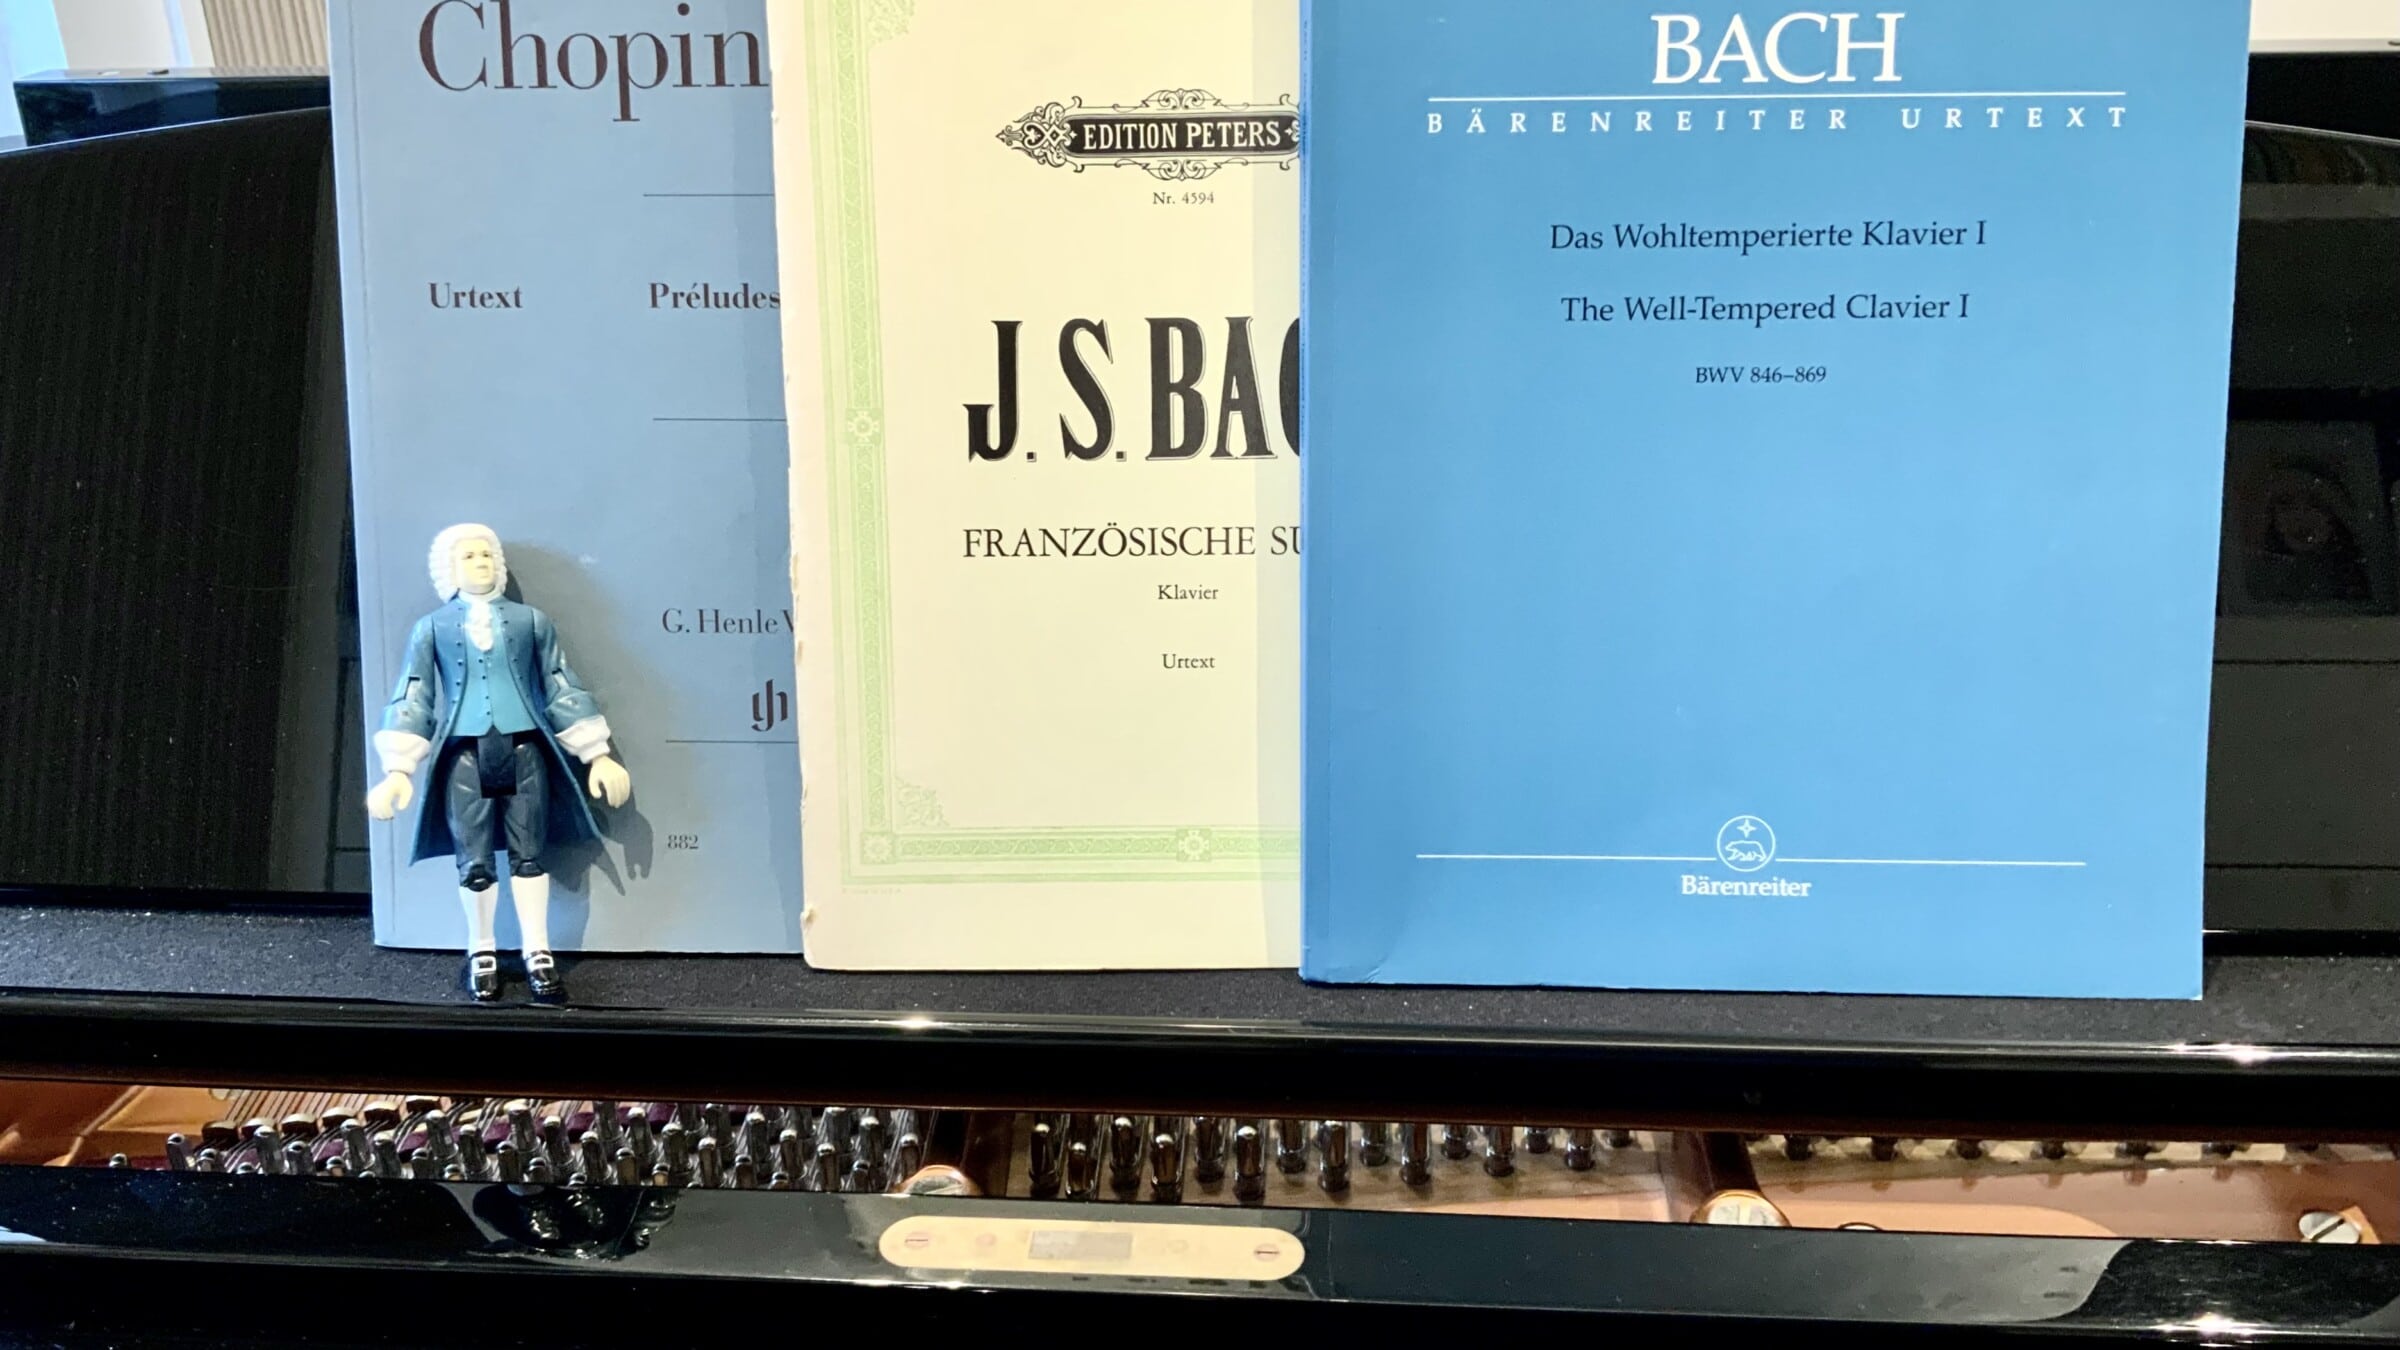 Bach action figure in front of scores on a piano